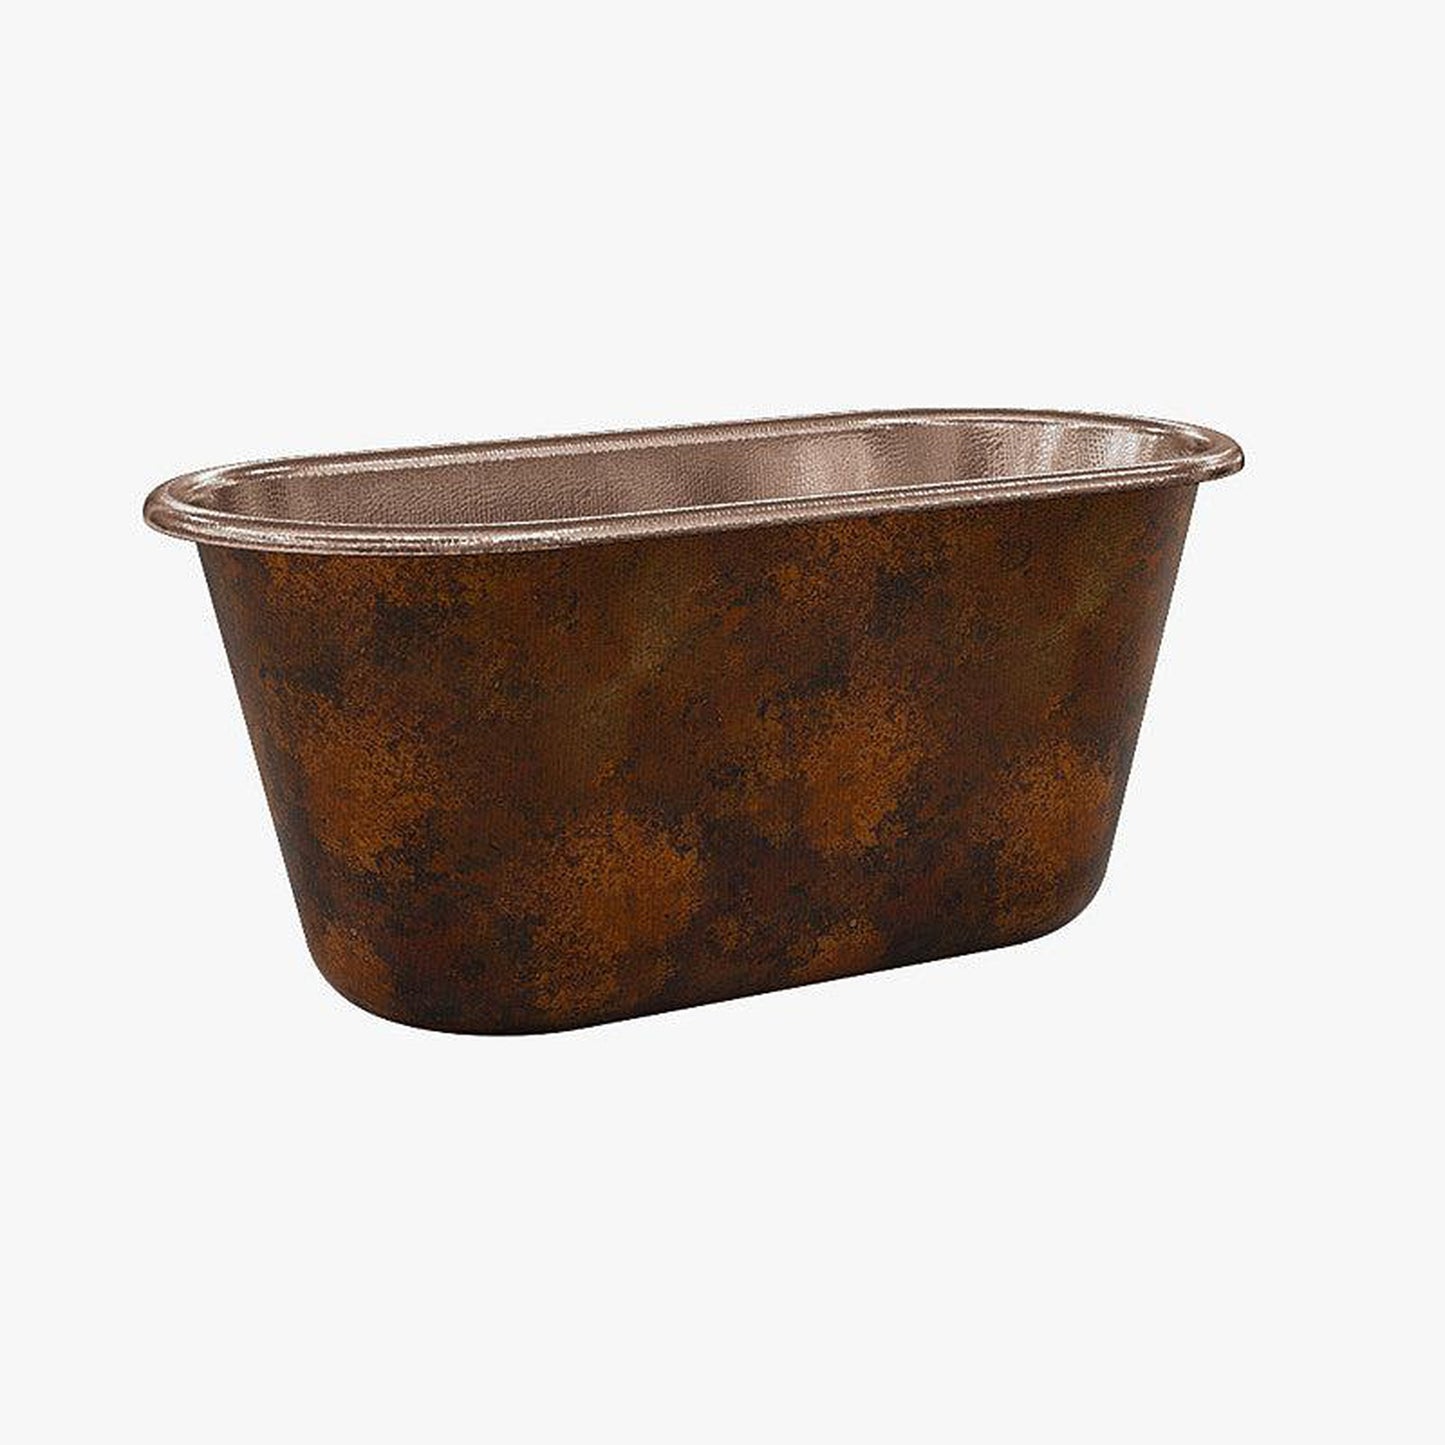 CopperSmith Heritage HX1 60" x 31" x 31" 14-Gauge Fire Copper Freestanding Bathtub With Polished Copper Interior and Polished Chrome Overflow Drain and Polished Brass Tub Filler